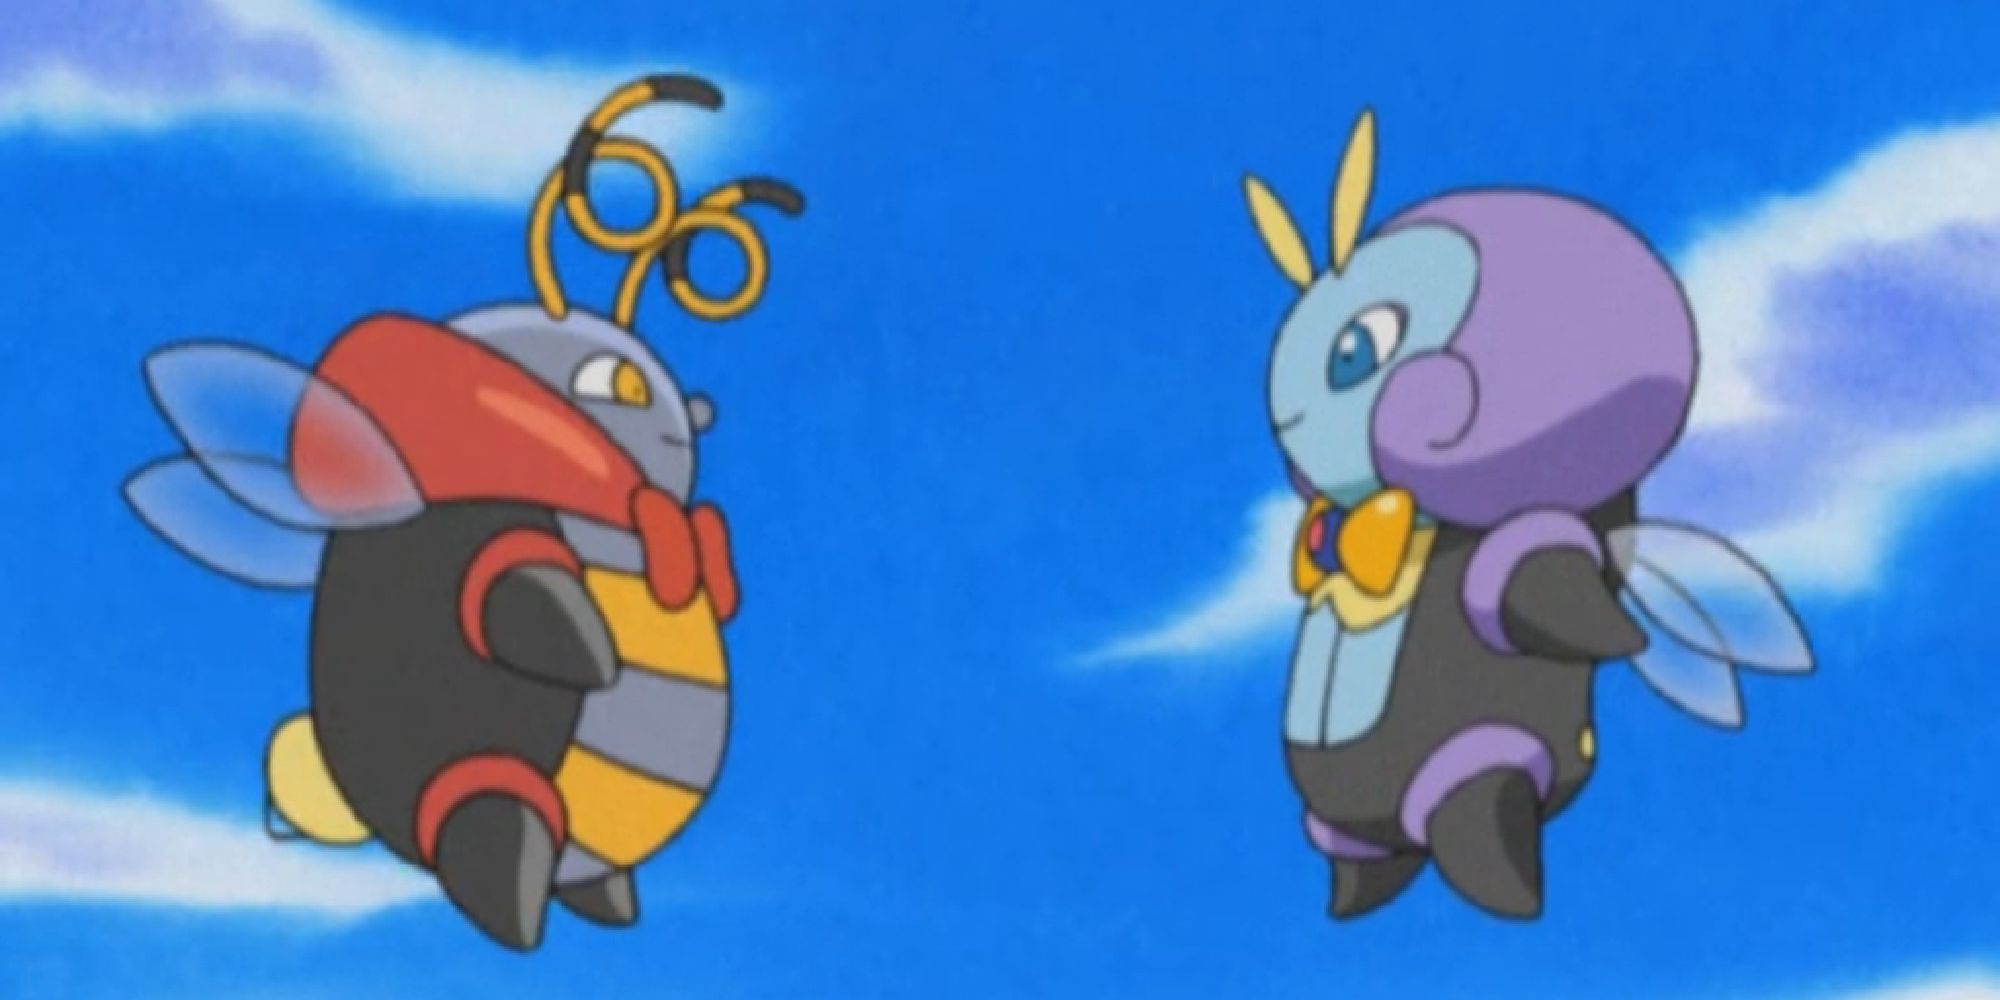 Volbeat and Illumise facing each other in the anime